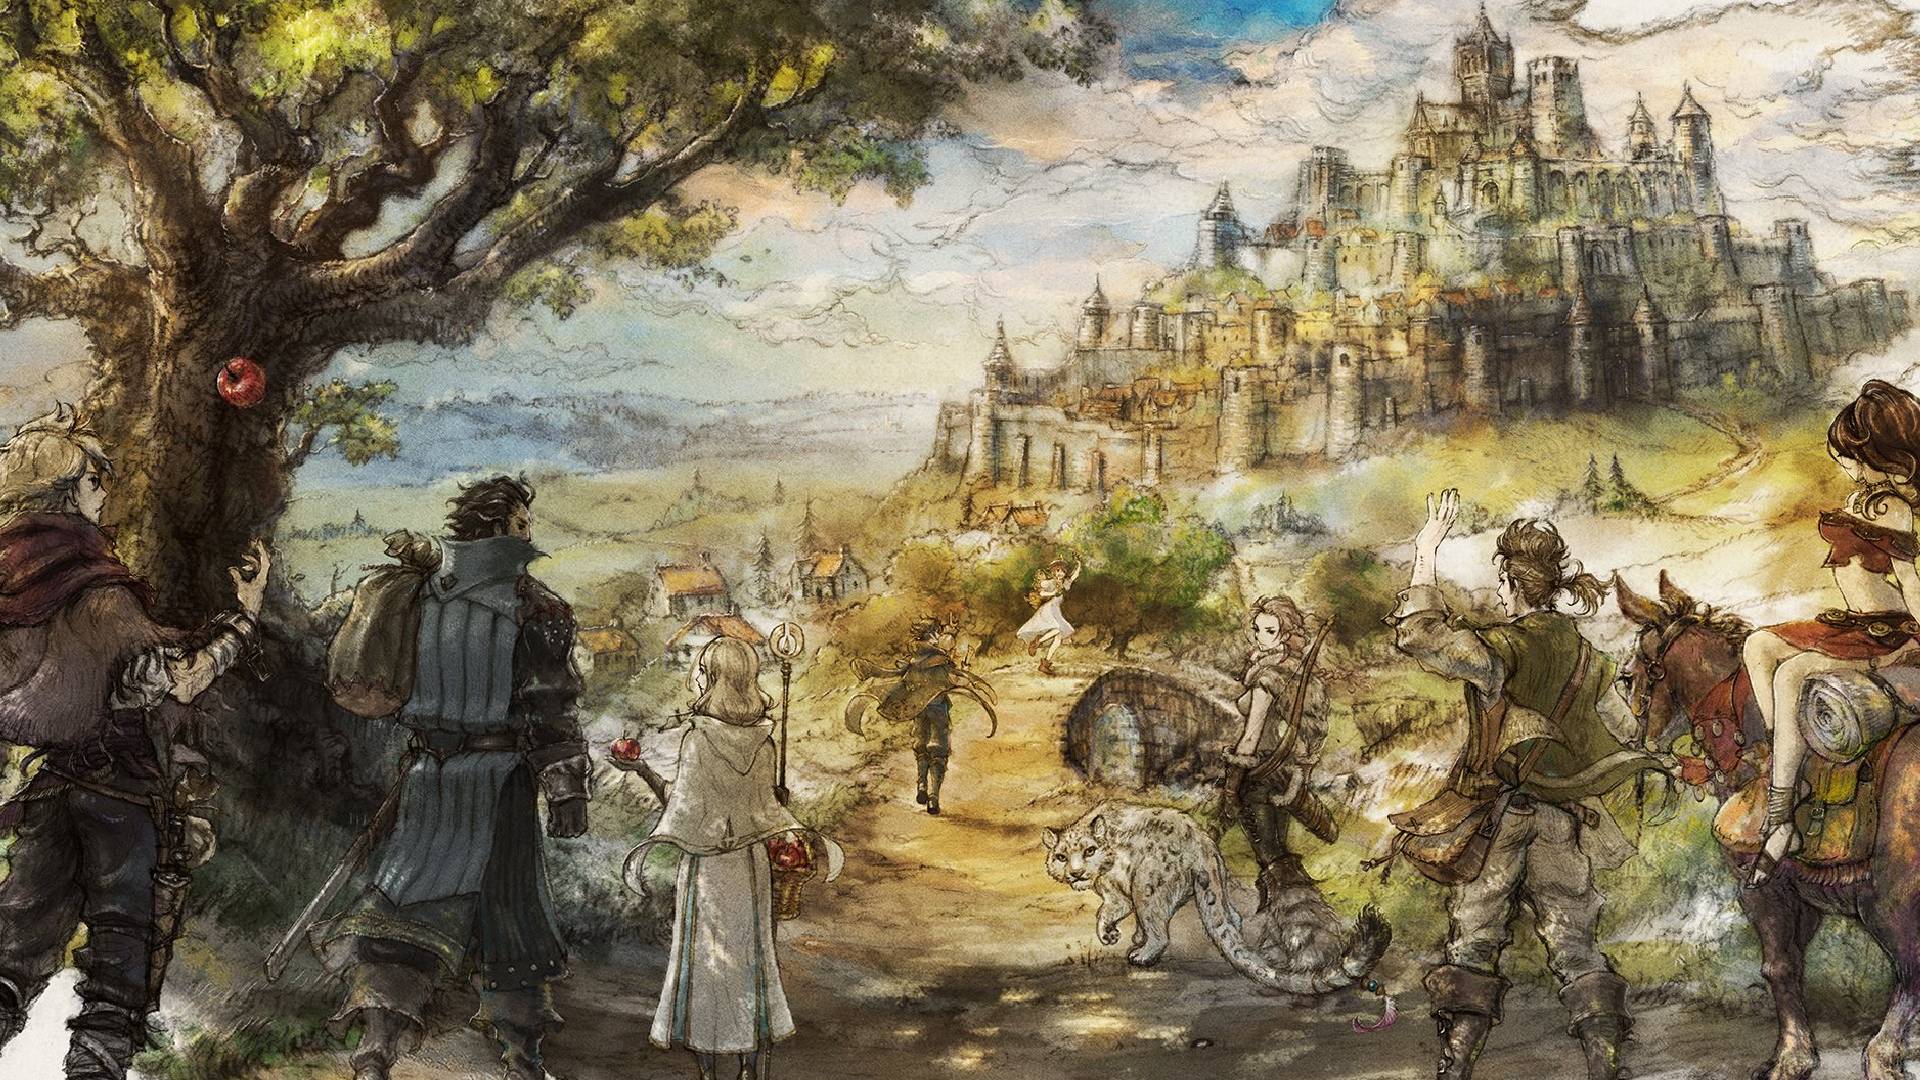 8 Things We Love About Octopath Traveler